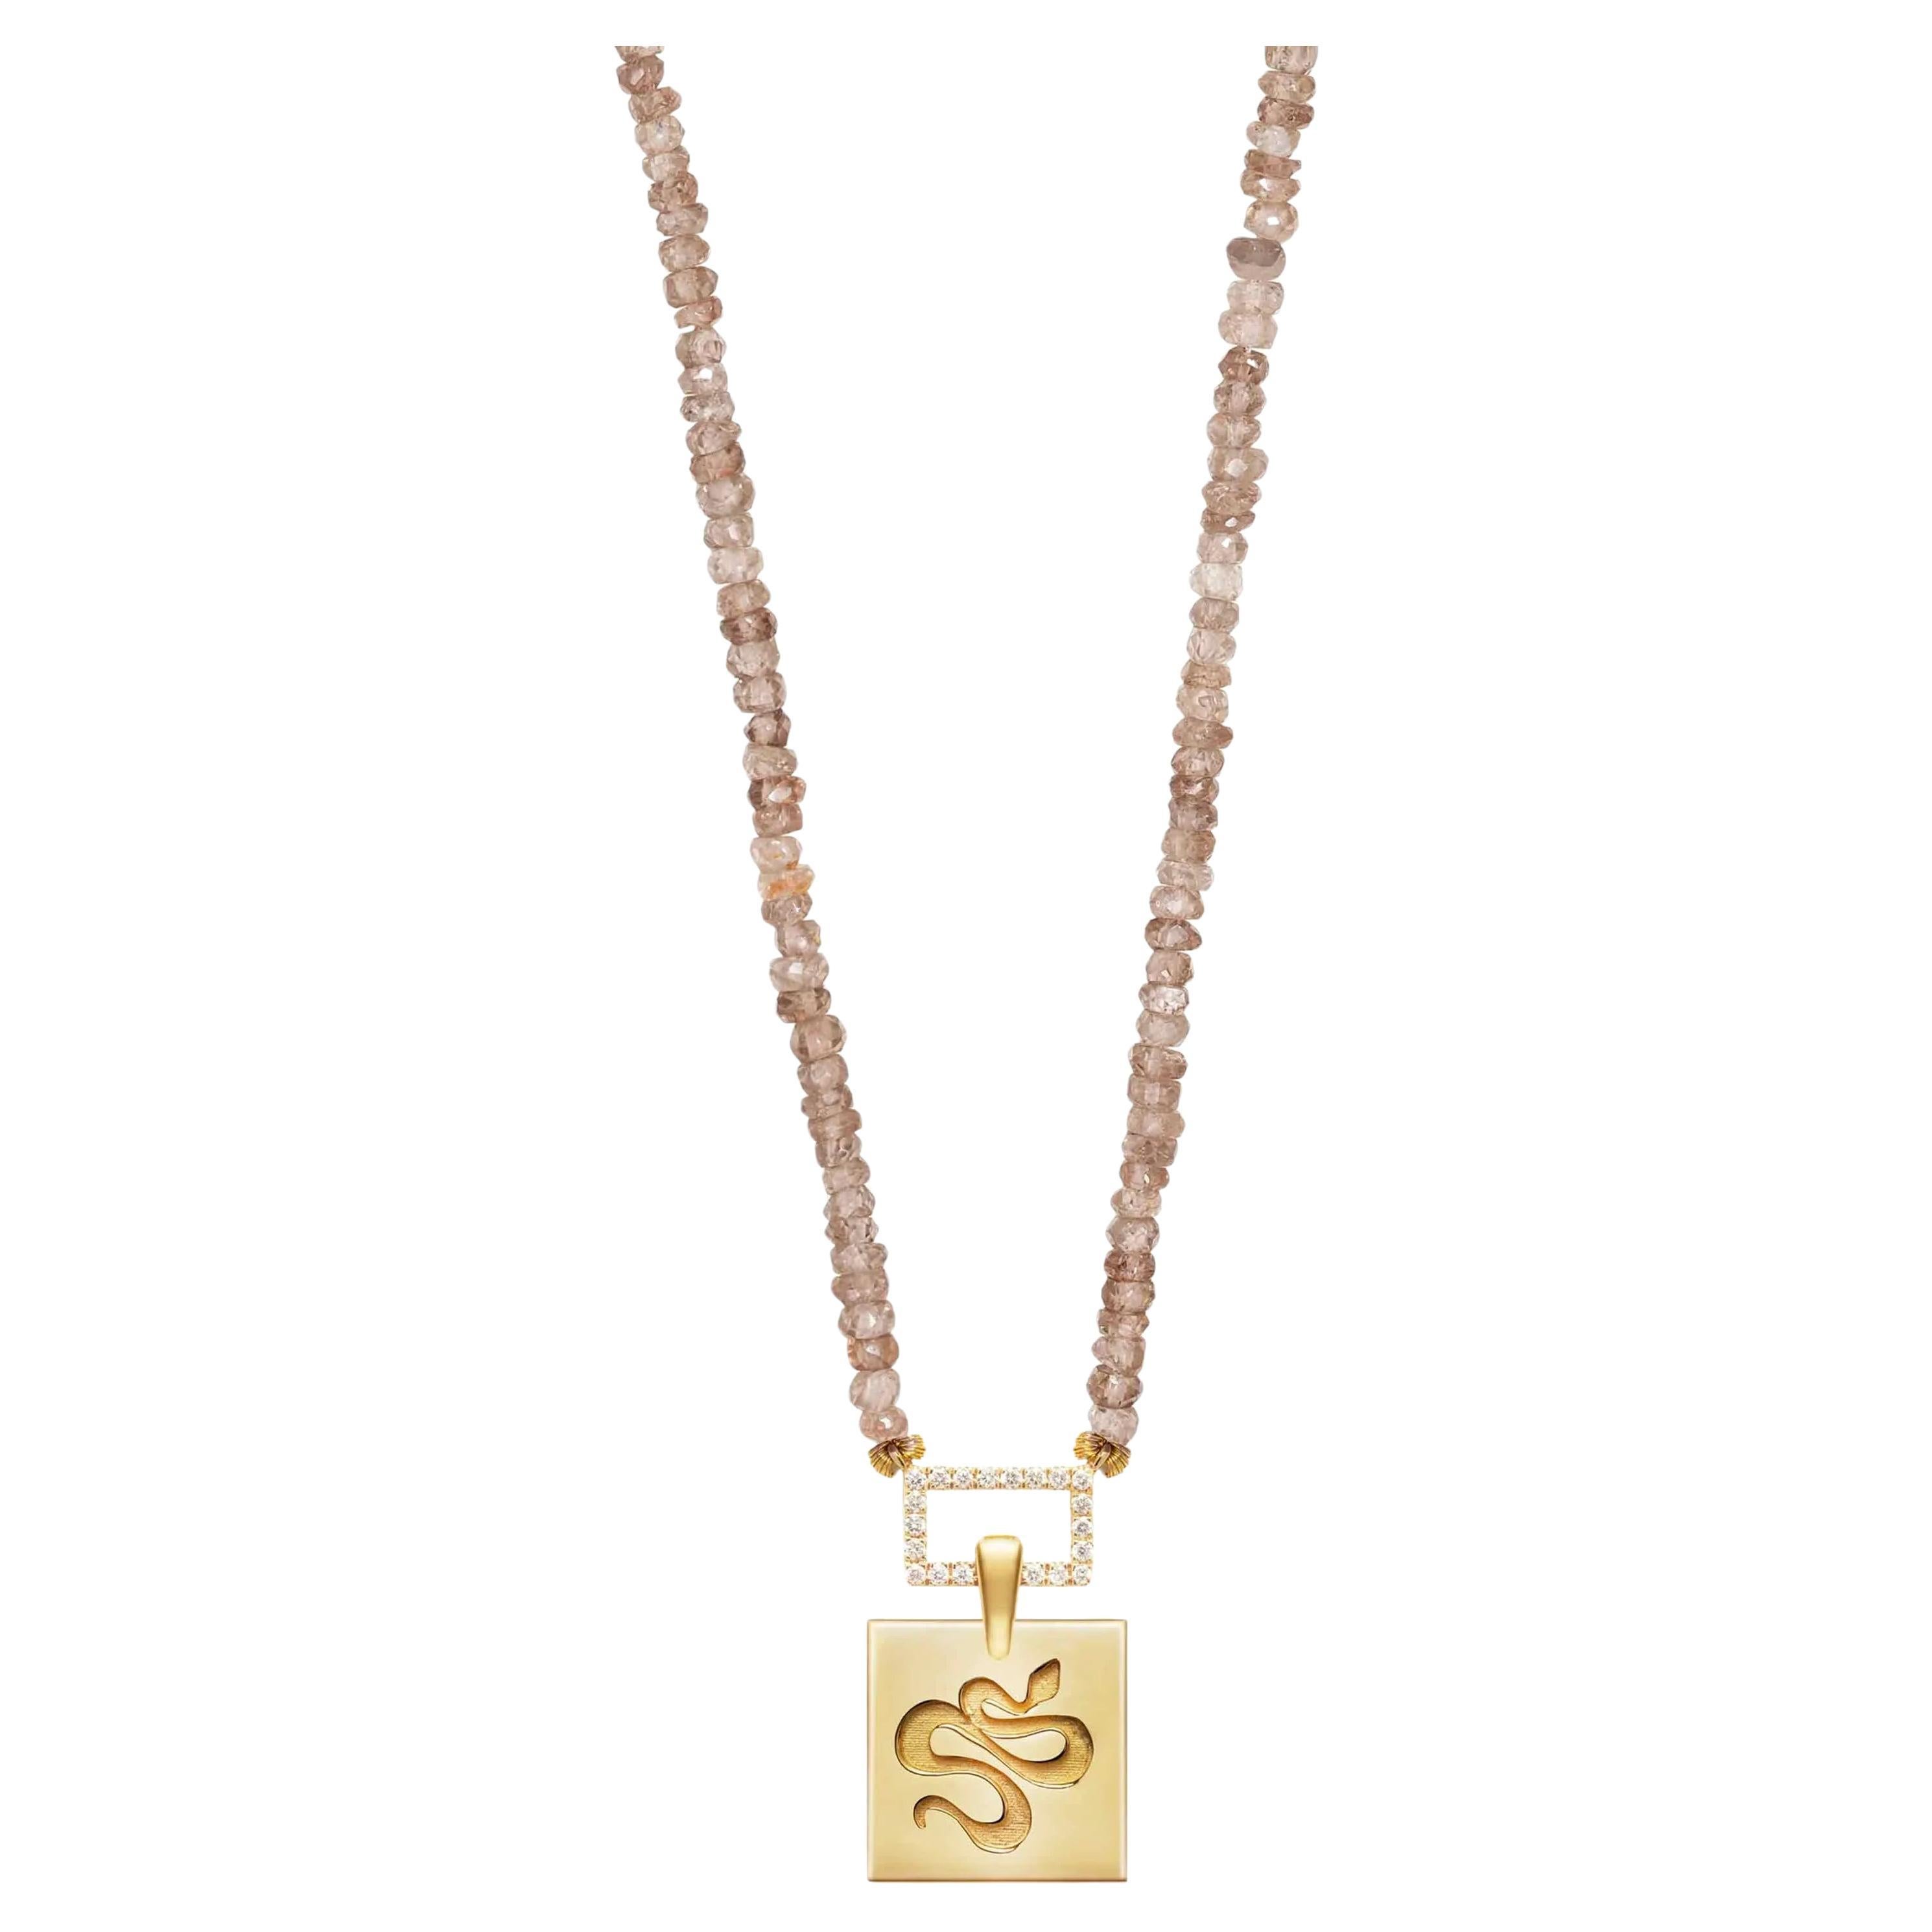 Zircon Champagne Beaded Necklace with Squared Snake Motif For Sale